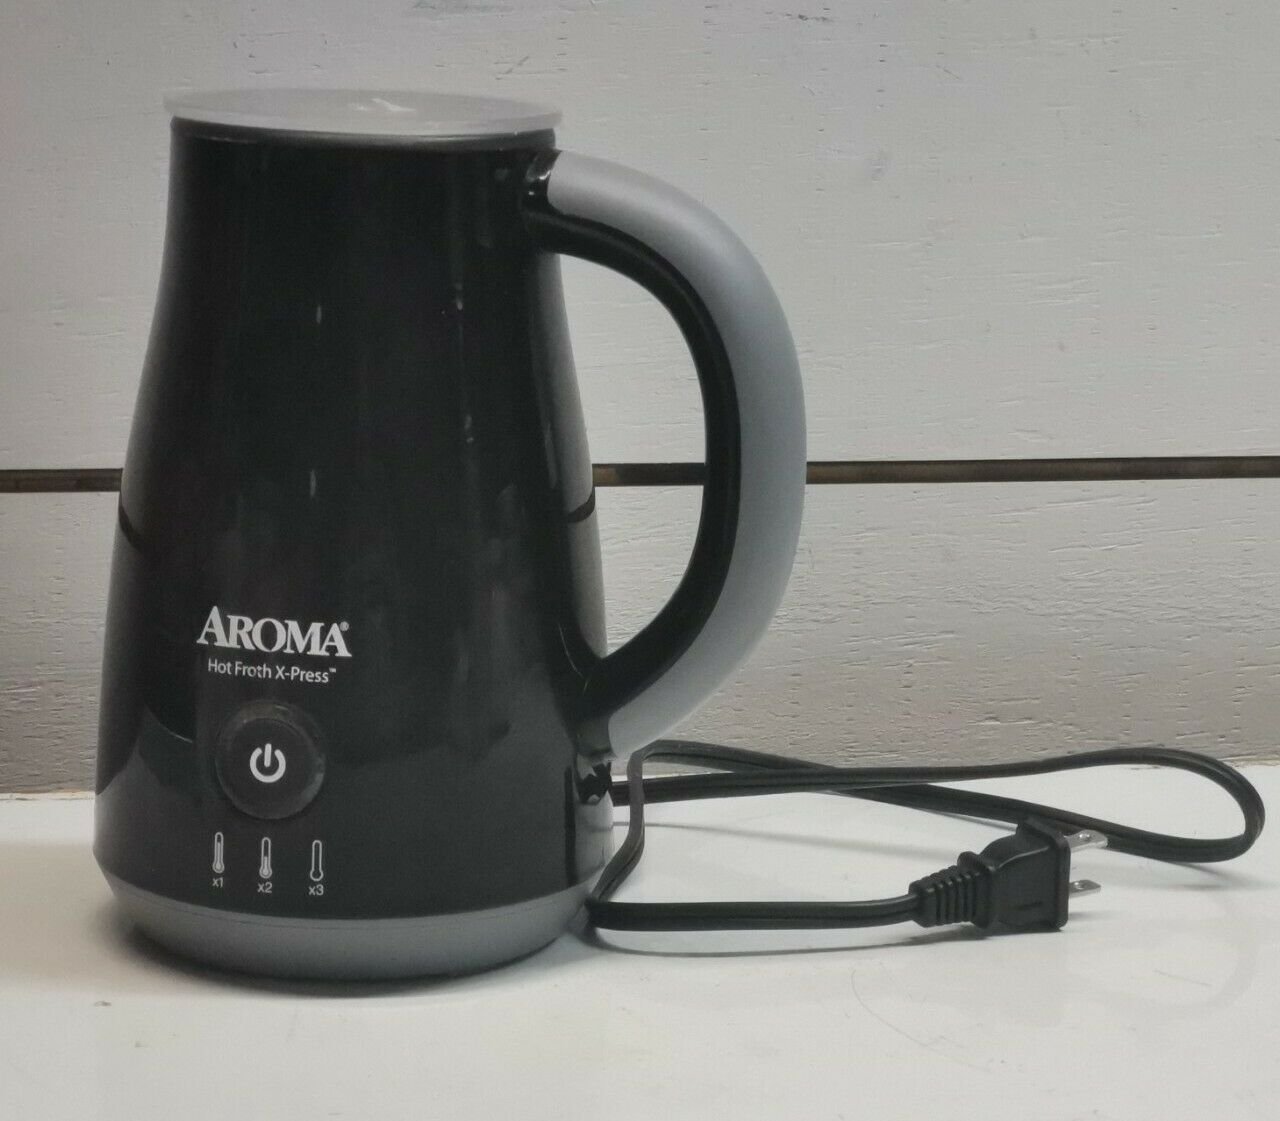 Aroma Hot Froth X-Press Milk Frother Heating System Model AFR-120B Open Box